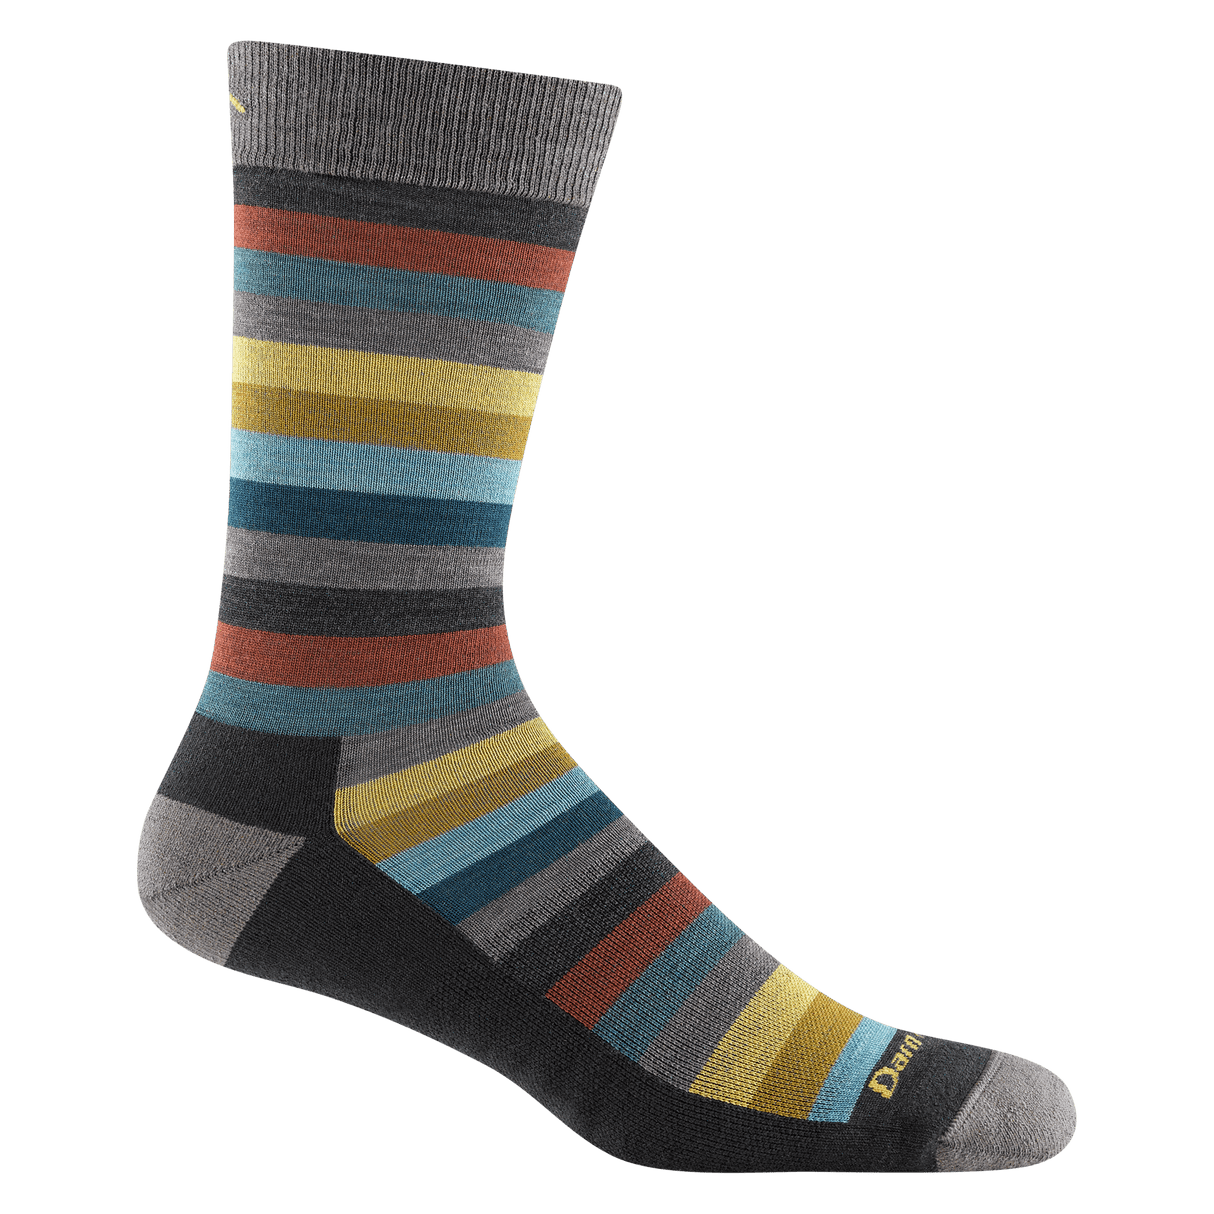 Darn Tough Mens Merlin Crew Lightweight with Cushion Socks  -  Large / Charcoal